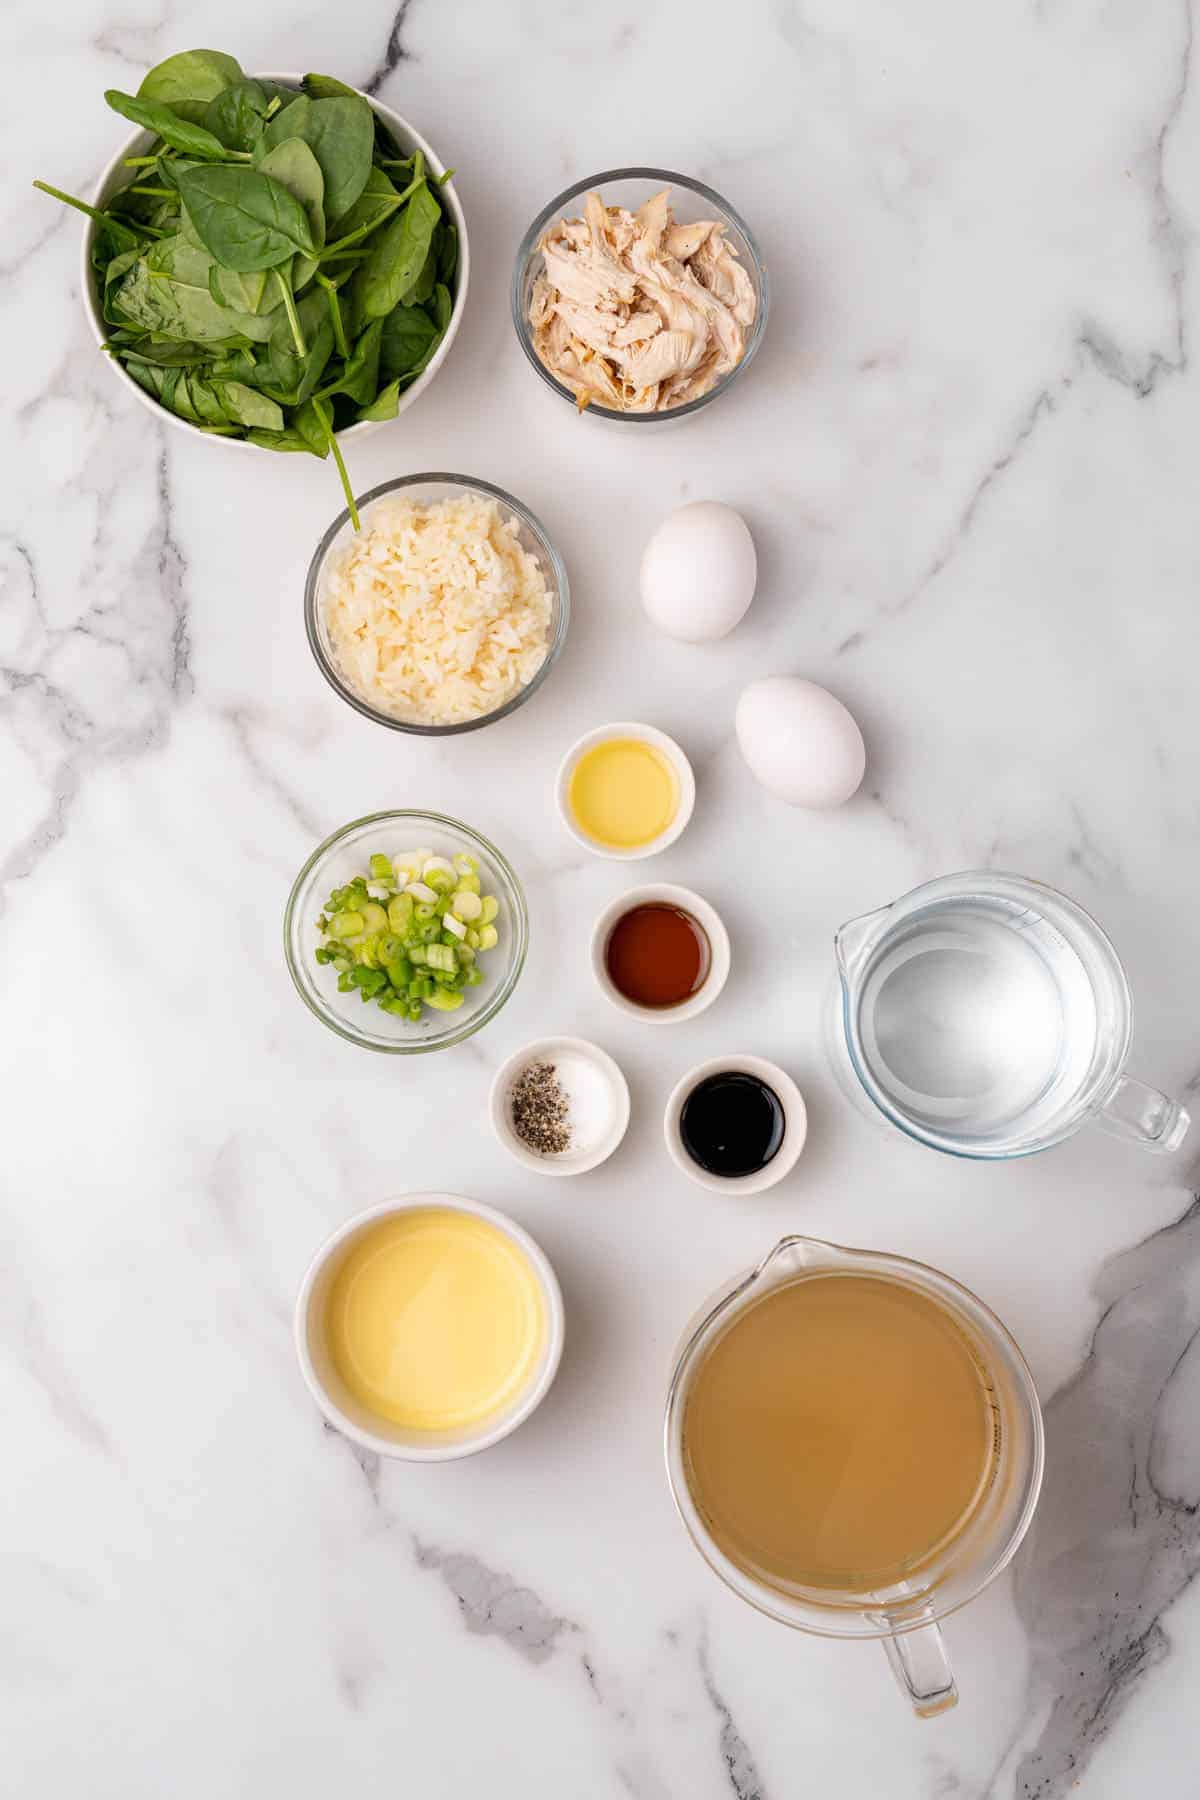 Ingredients for recipe separated into individual bowls and ramekins, as seen from above on a white marble surface